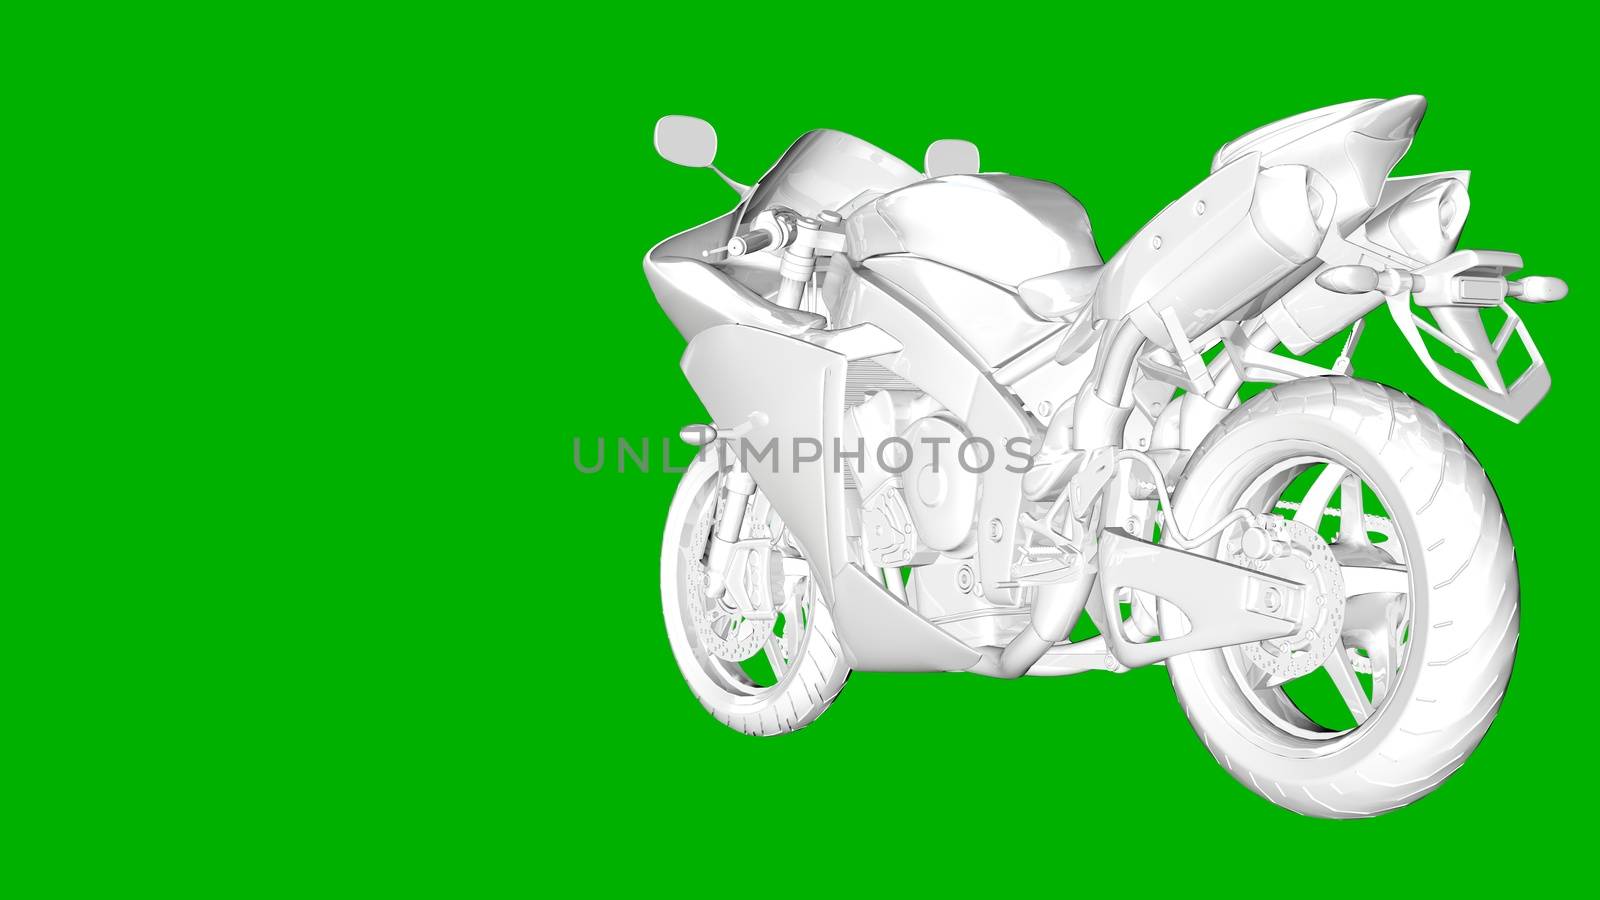 isolated white 3d rendering of a motor on a green background by fares139